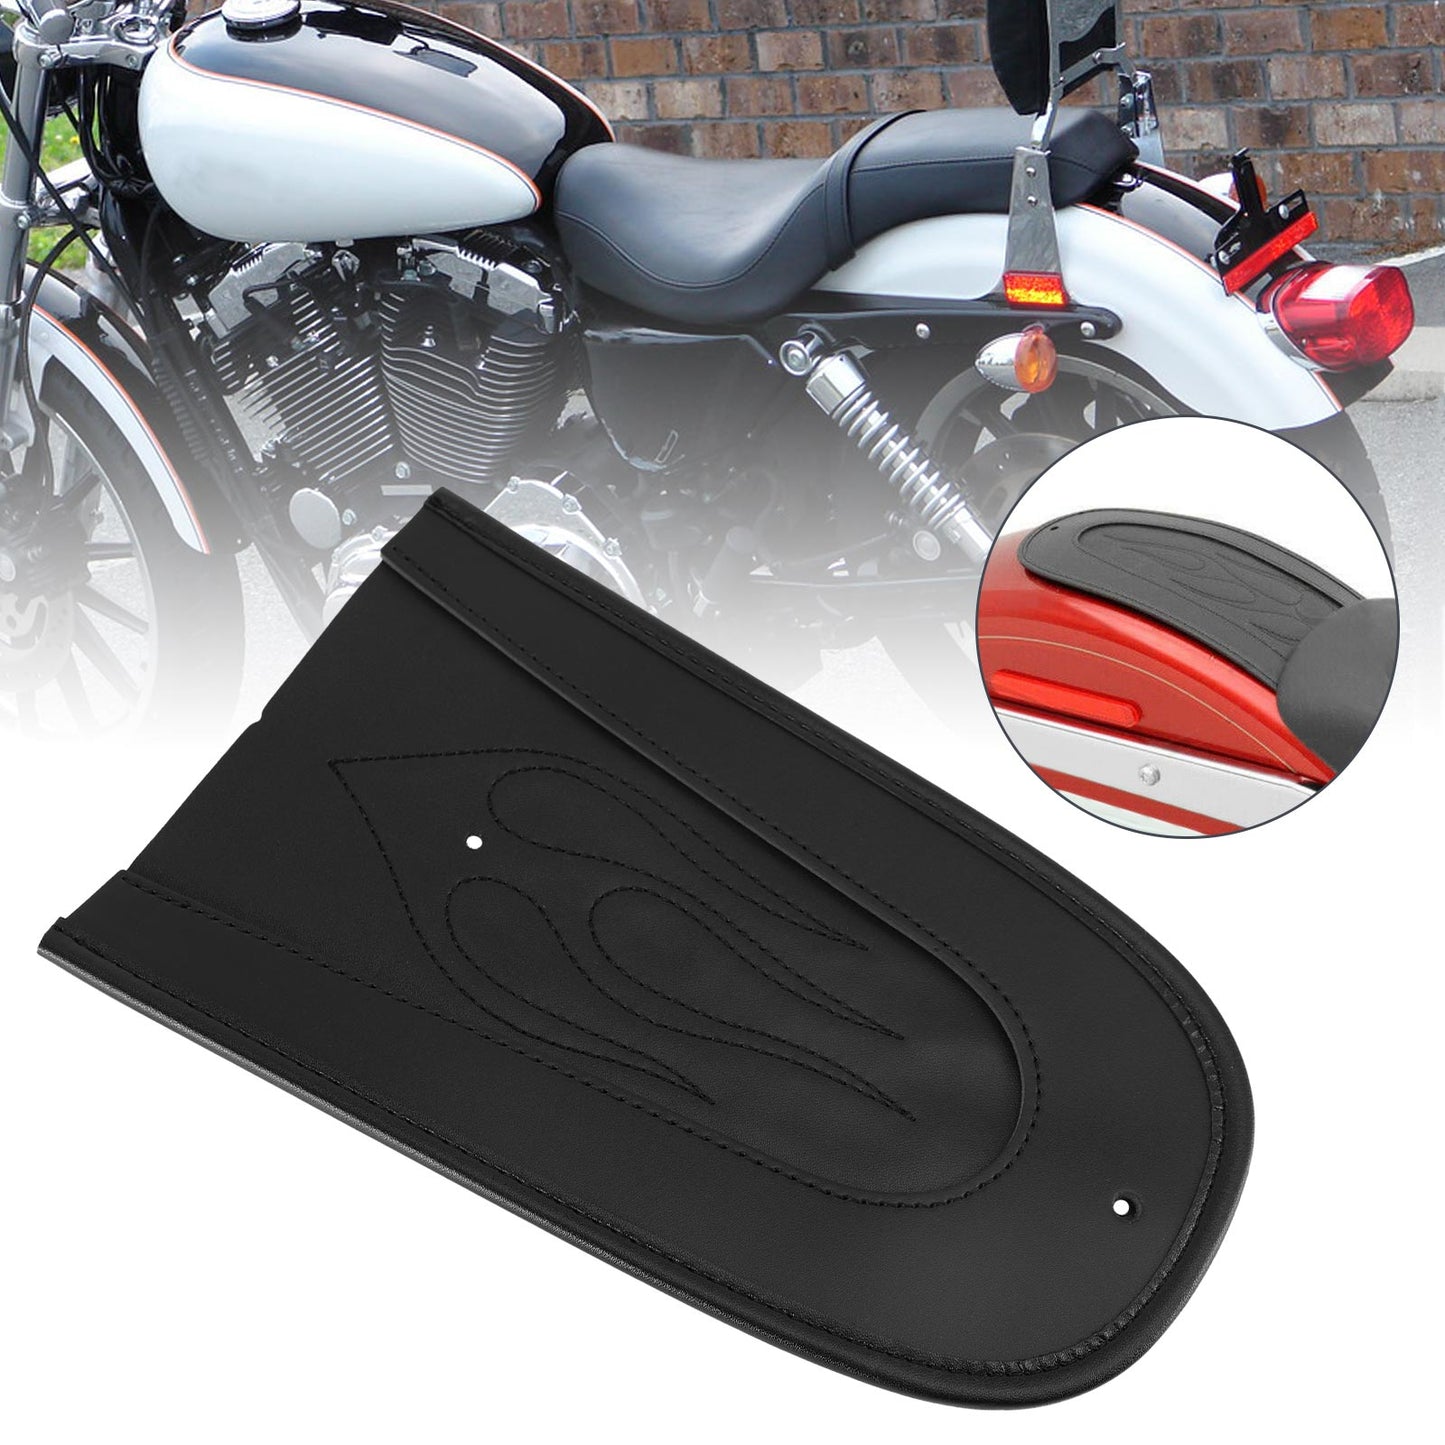 Black PU Leather Flame Stitch Solo Seat Rear Fender Bib For Sportster 1200 883